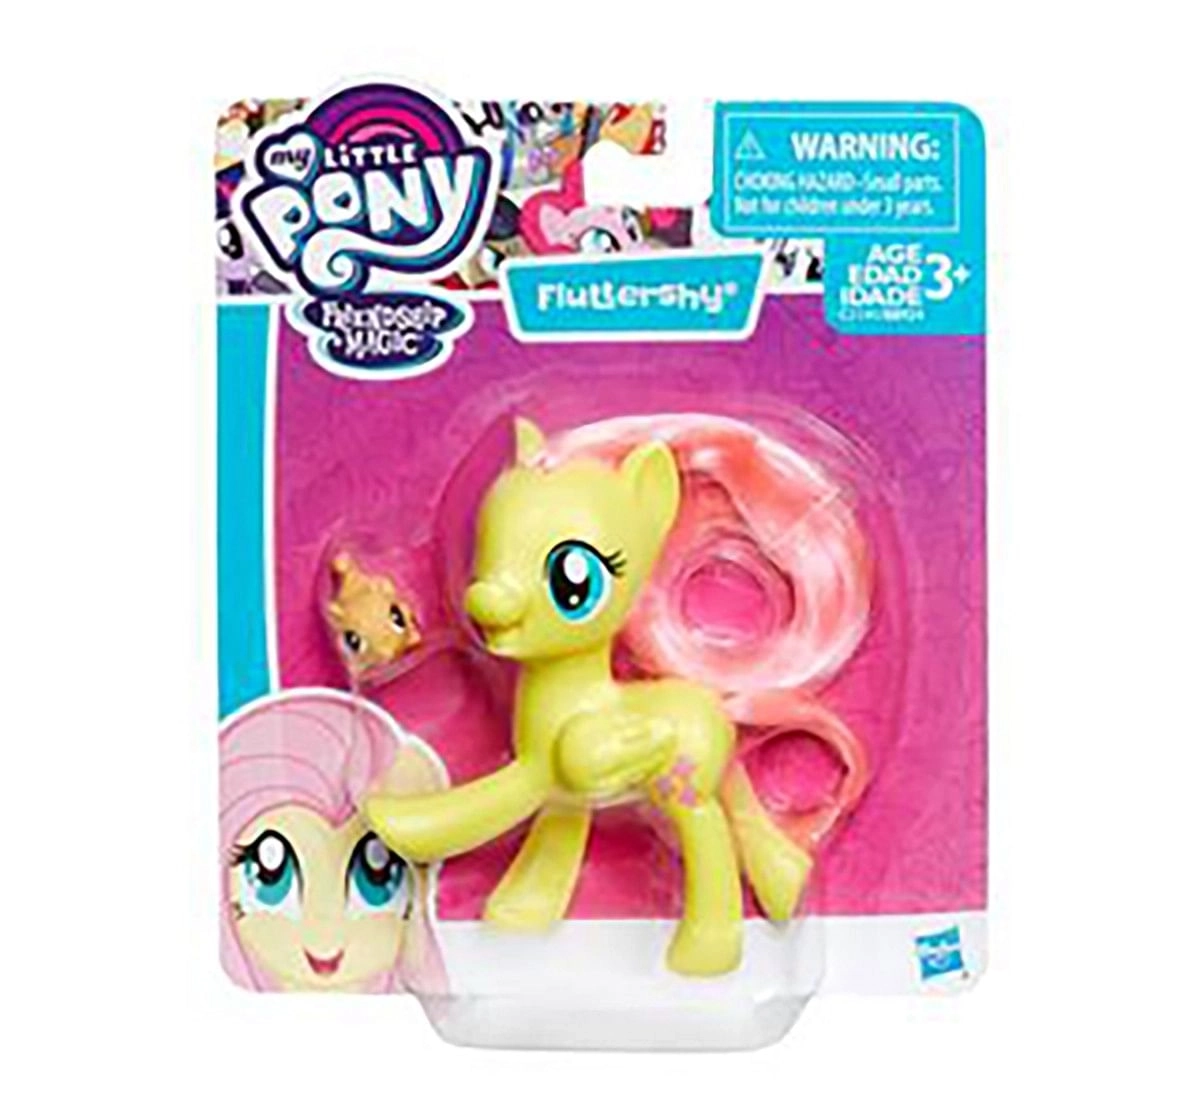  My Little Pony Friends Assorted Collectible Dolls for Kids age 3Y+ 